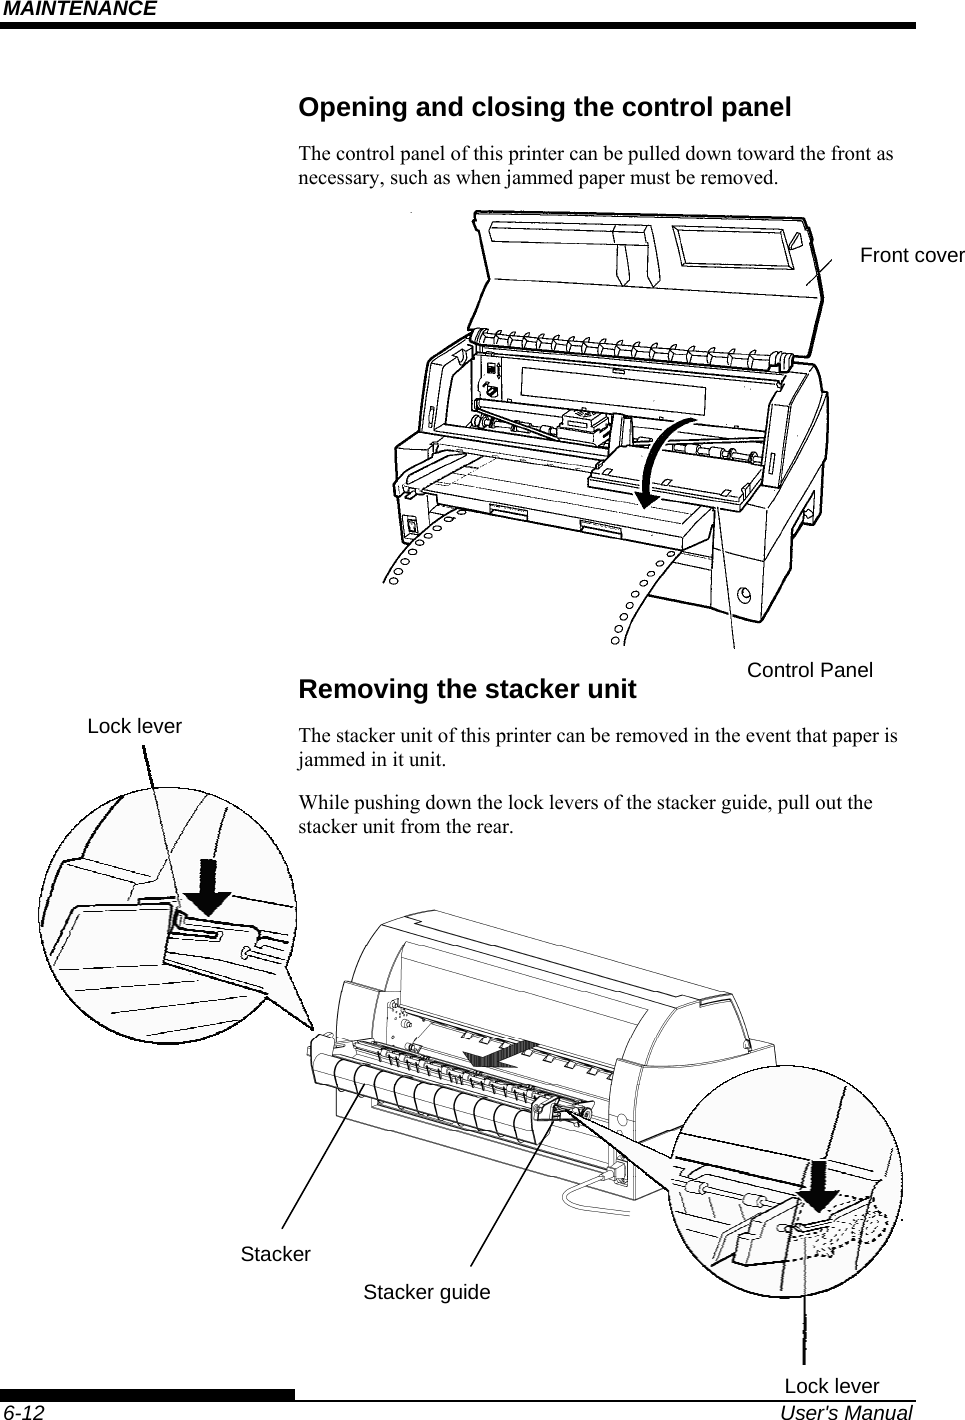 MAINTENANCE    6-12  User&apos;s Manual Opening and closing the control panel The control panel of this printer can be pulled down toward the front as necessary, such as when jammed paper must be removed.  Removing the stacker unit The stacker unit of this printer can be removed in the event that paper is jammed in it unit. While pushing down the lock levers of the stacker guide, pull out the stacker unit from the rear.   Lock lever Front coverControl Panel Stacker guideLock lever Stacker 